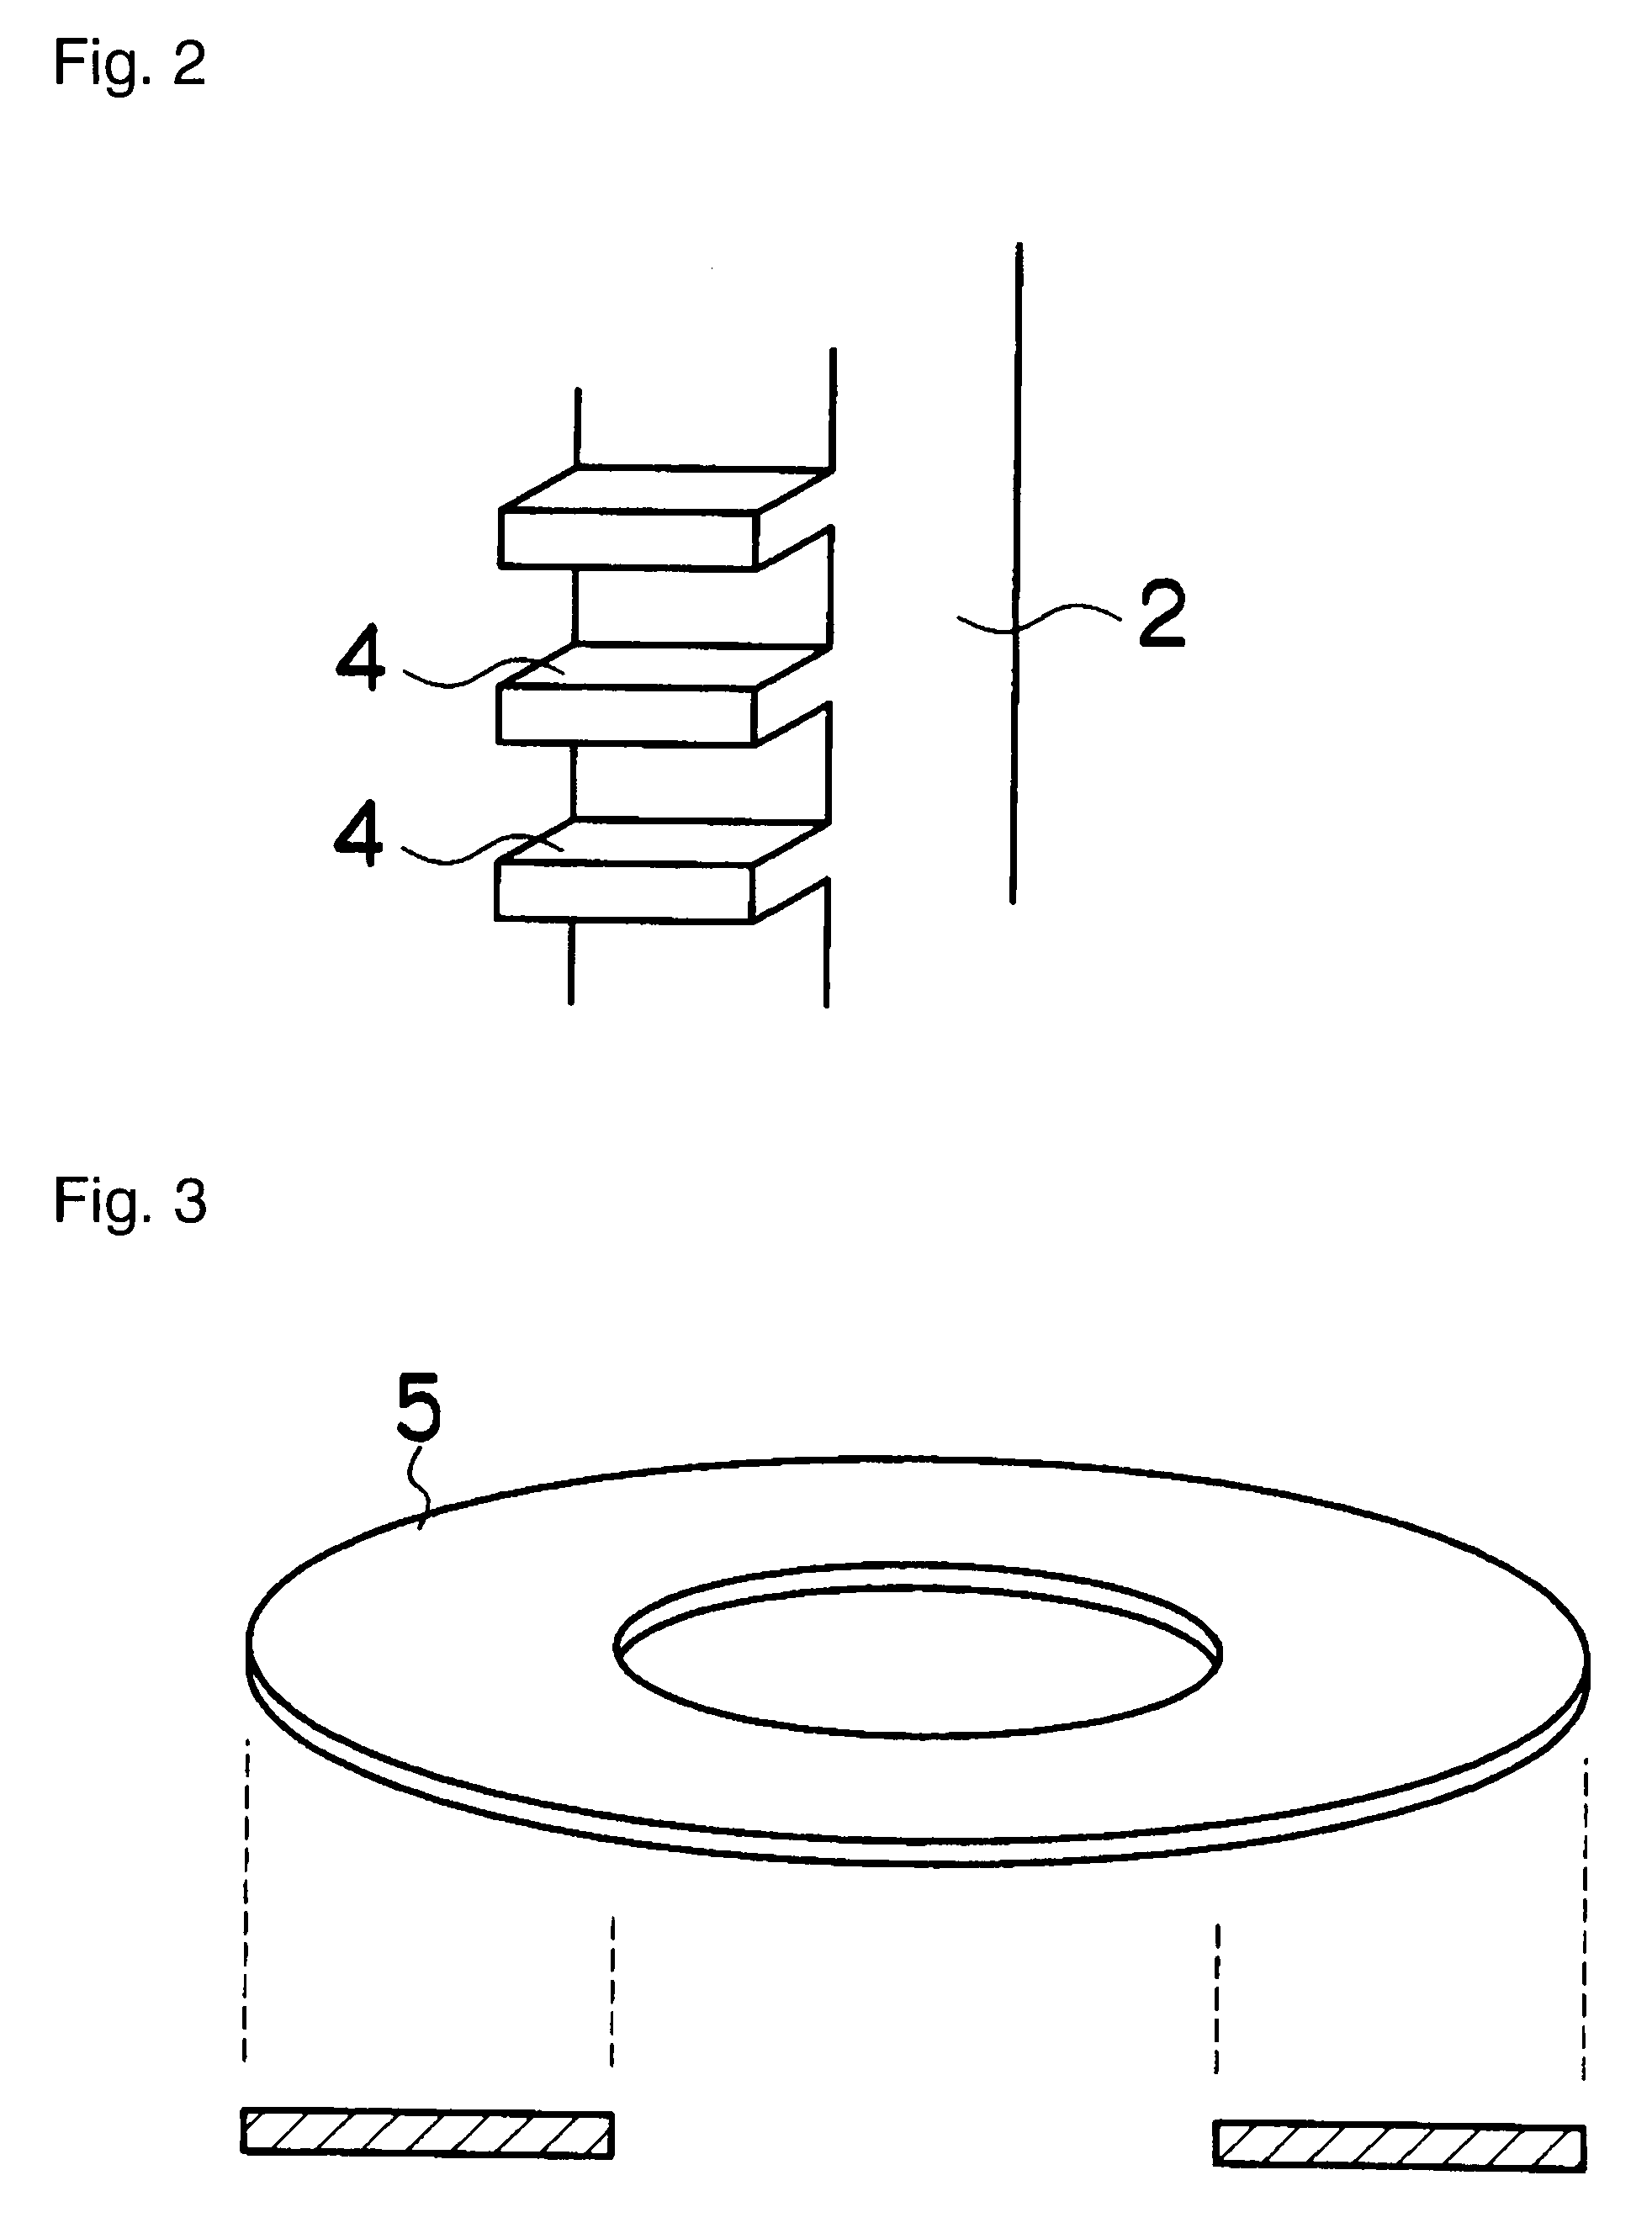 Method and apparatus for measuring shape of heat treatment jig